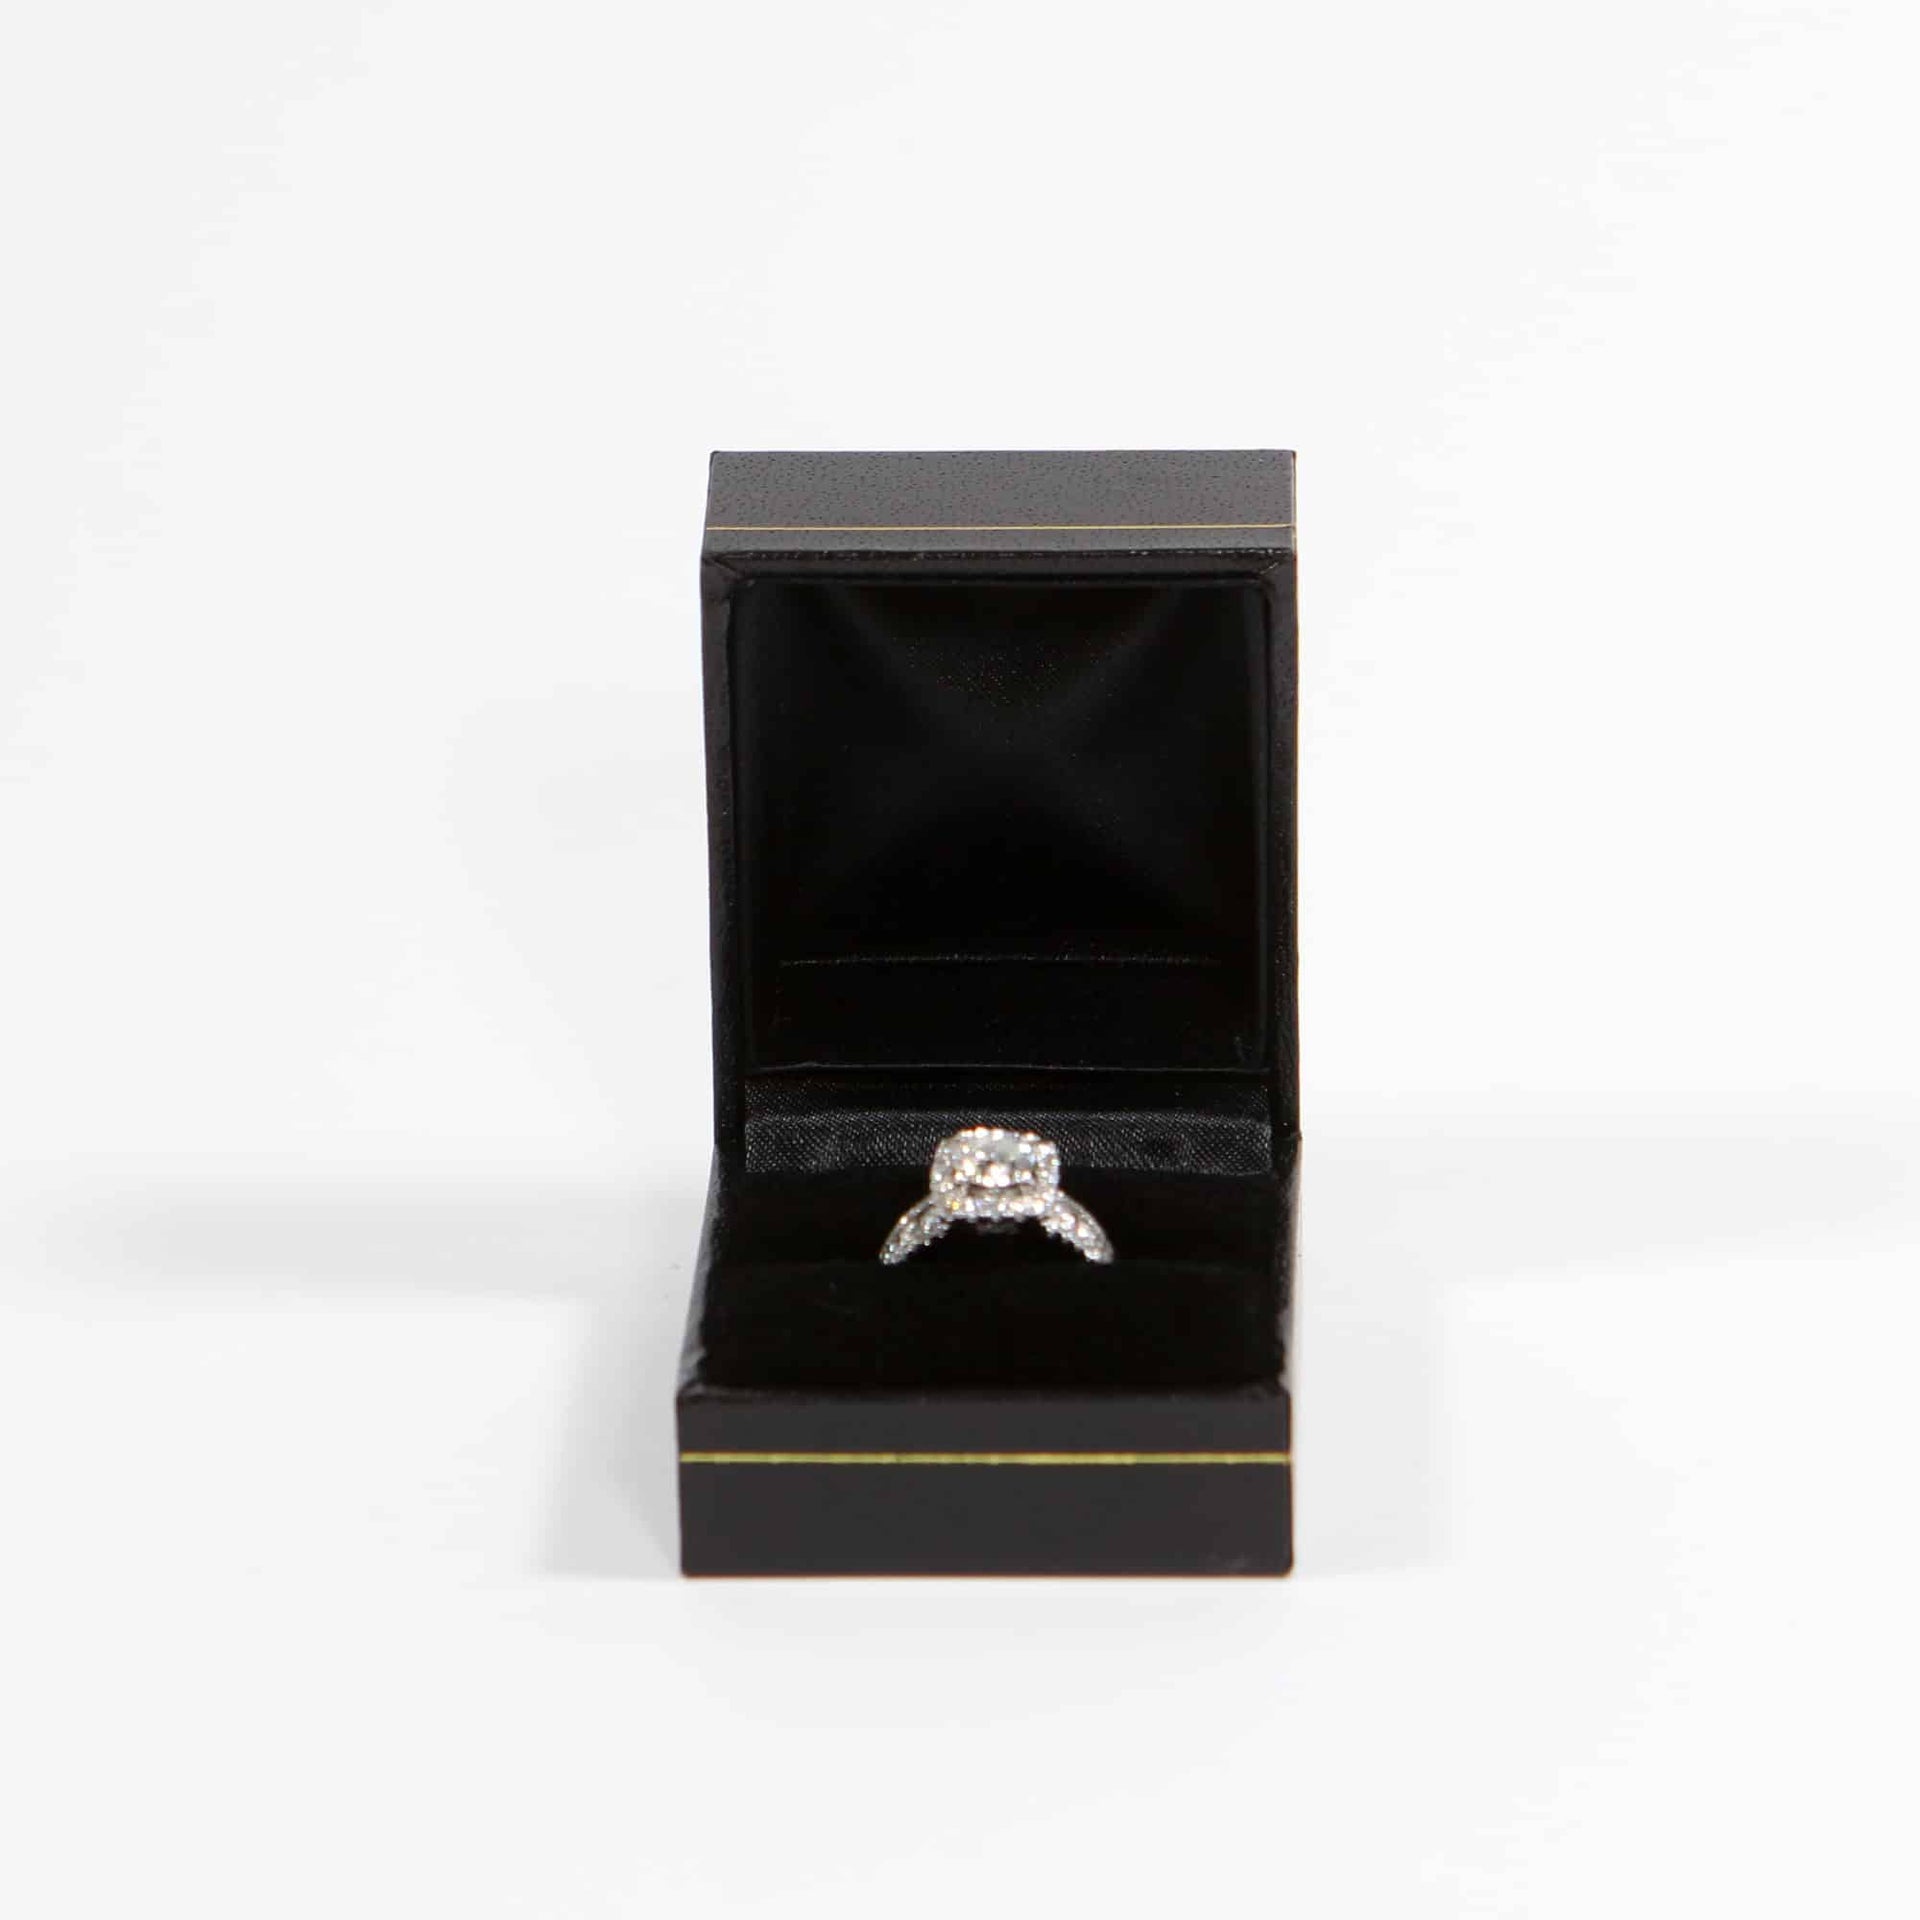 Black ring box with gold design. Perfect for your special wedding day